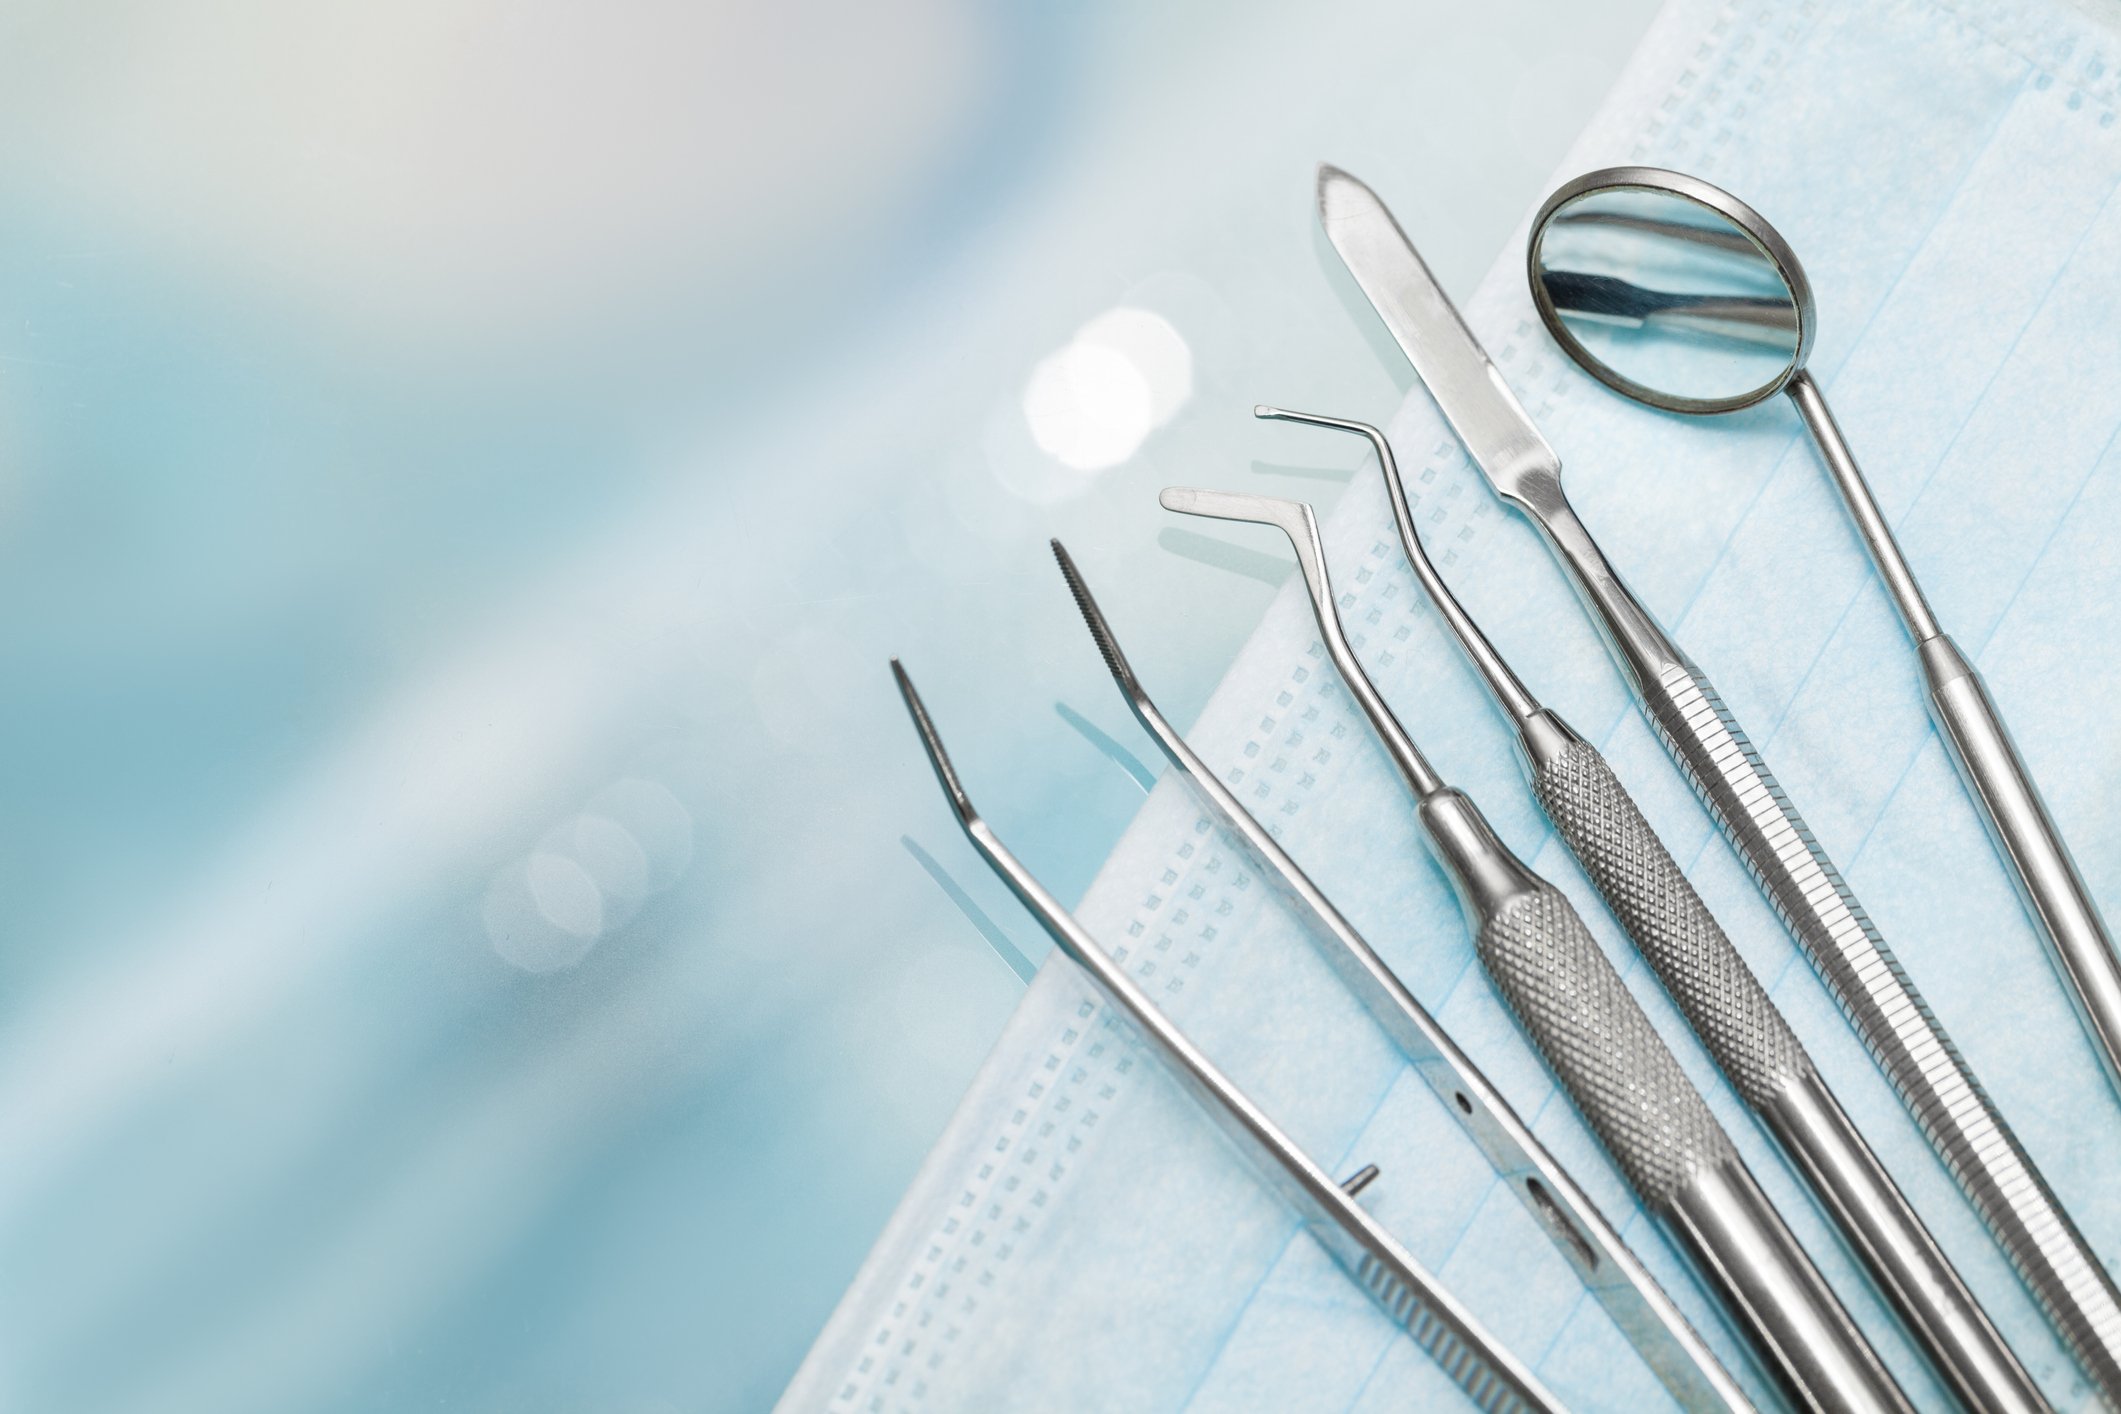 A set of mental dentistry tools sits on a face mask